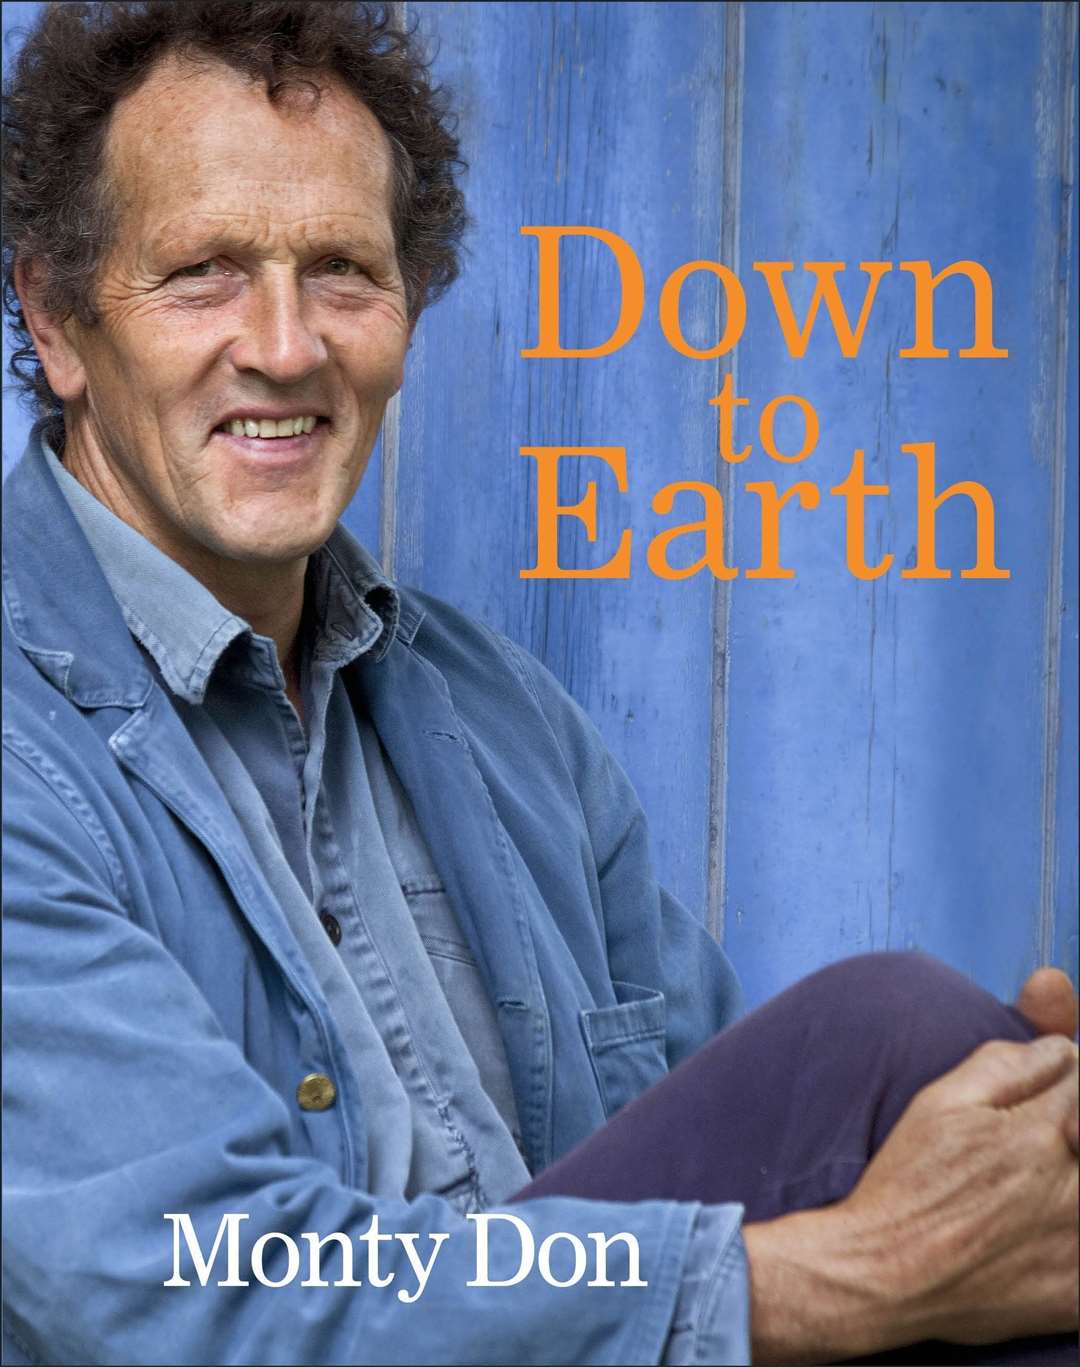 Down To Earth by Monty Don is published by DK, priced £17.99. Available now.